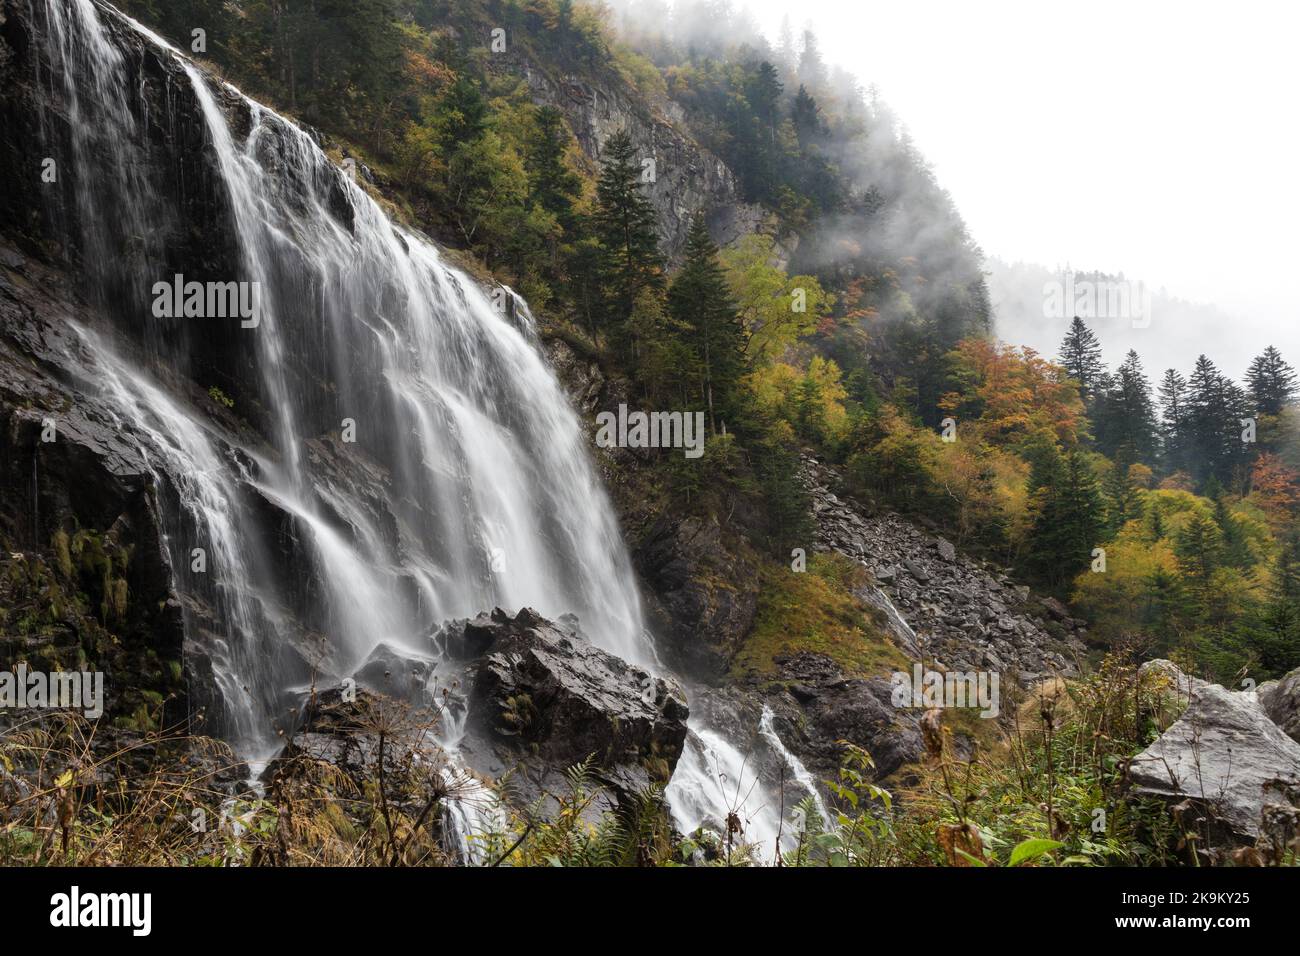 The Lower Falls of the Cascade d’Ars in Autumn, Aulus les Bains, Ariege, Pyrenees, France, EU Stock Photo